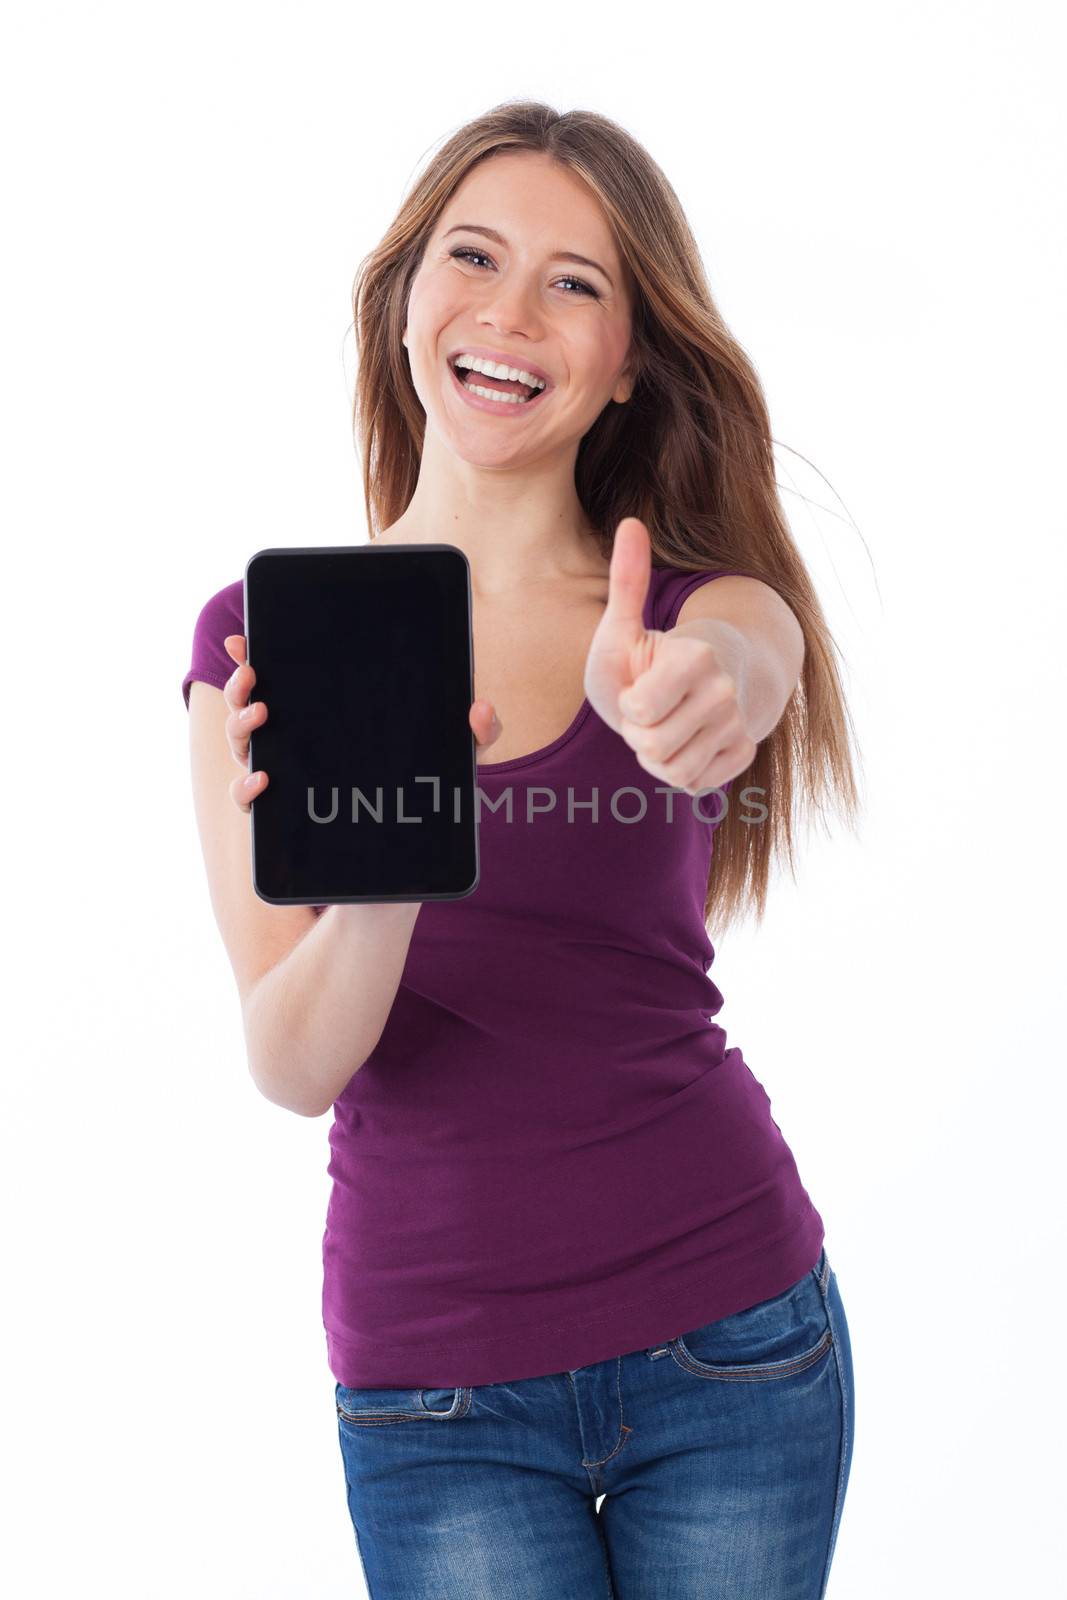 Cheerful woman showing an electronic tablet and having a positive gesture